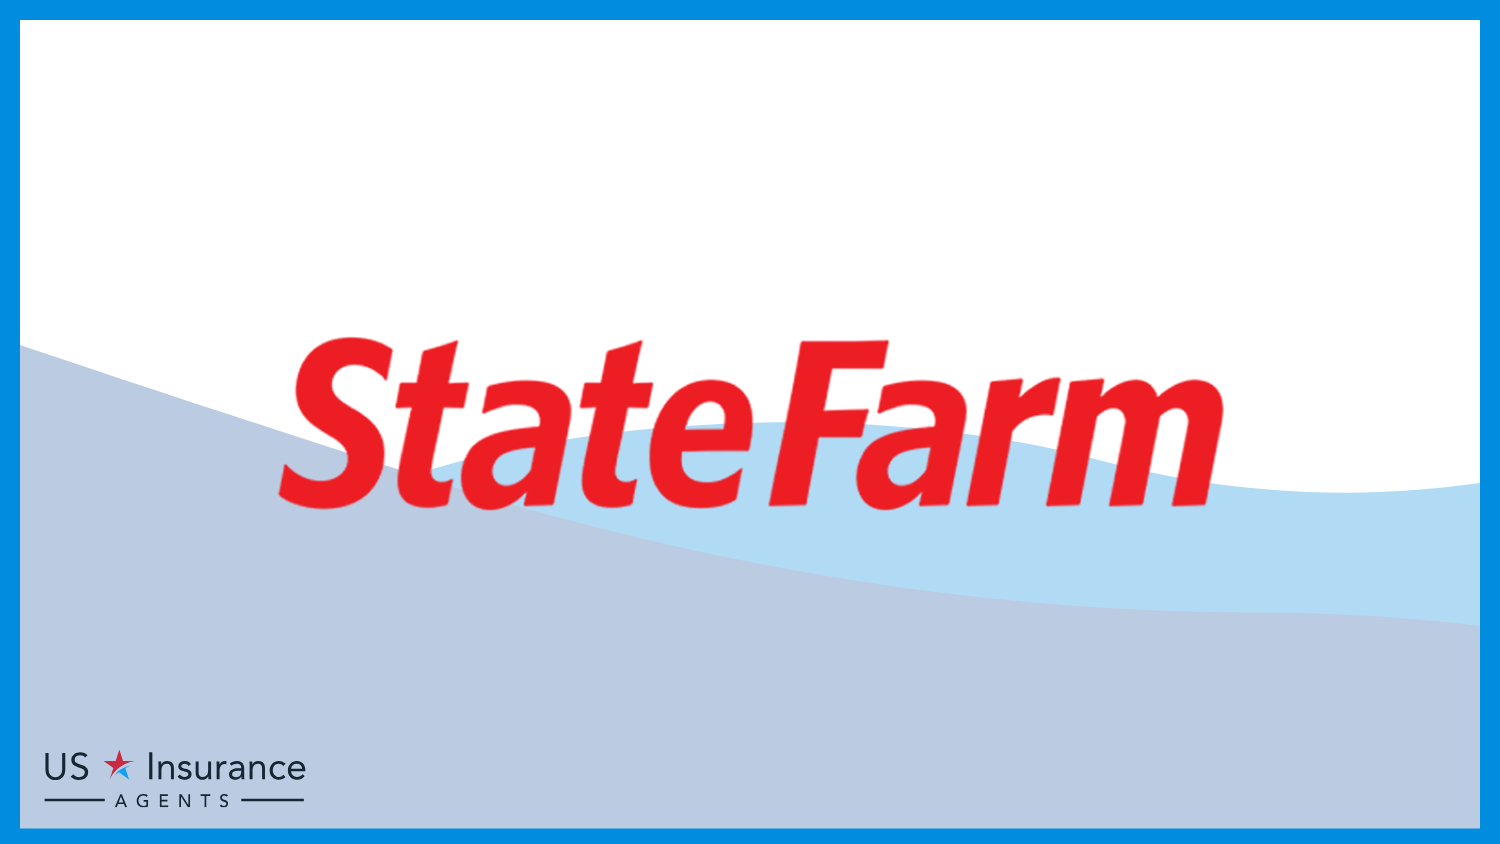 State Farm: Best Business Insurance for Antique Stores